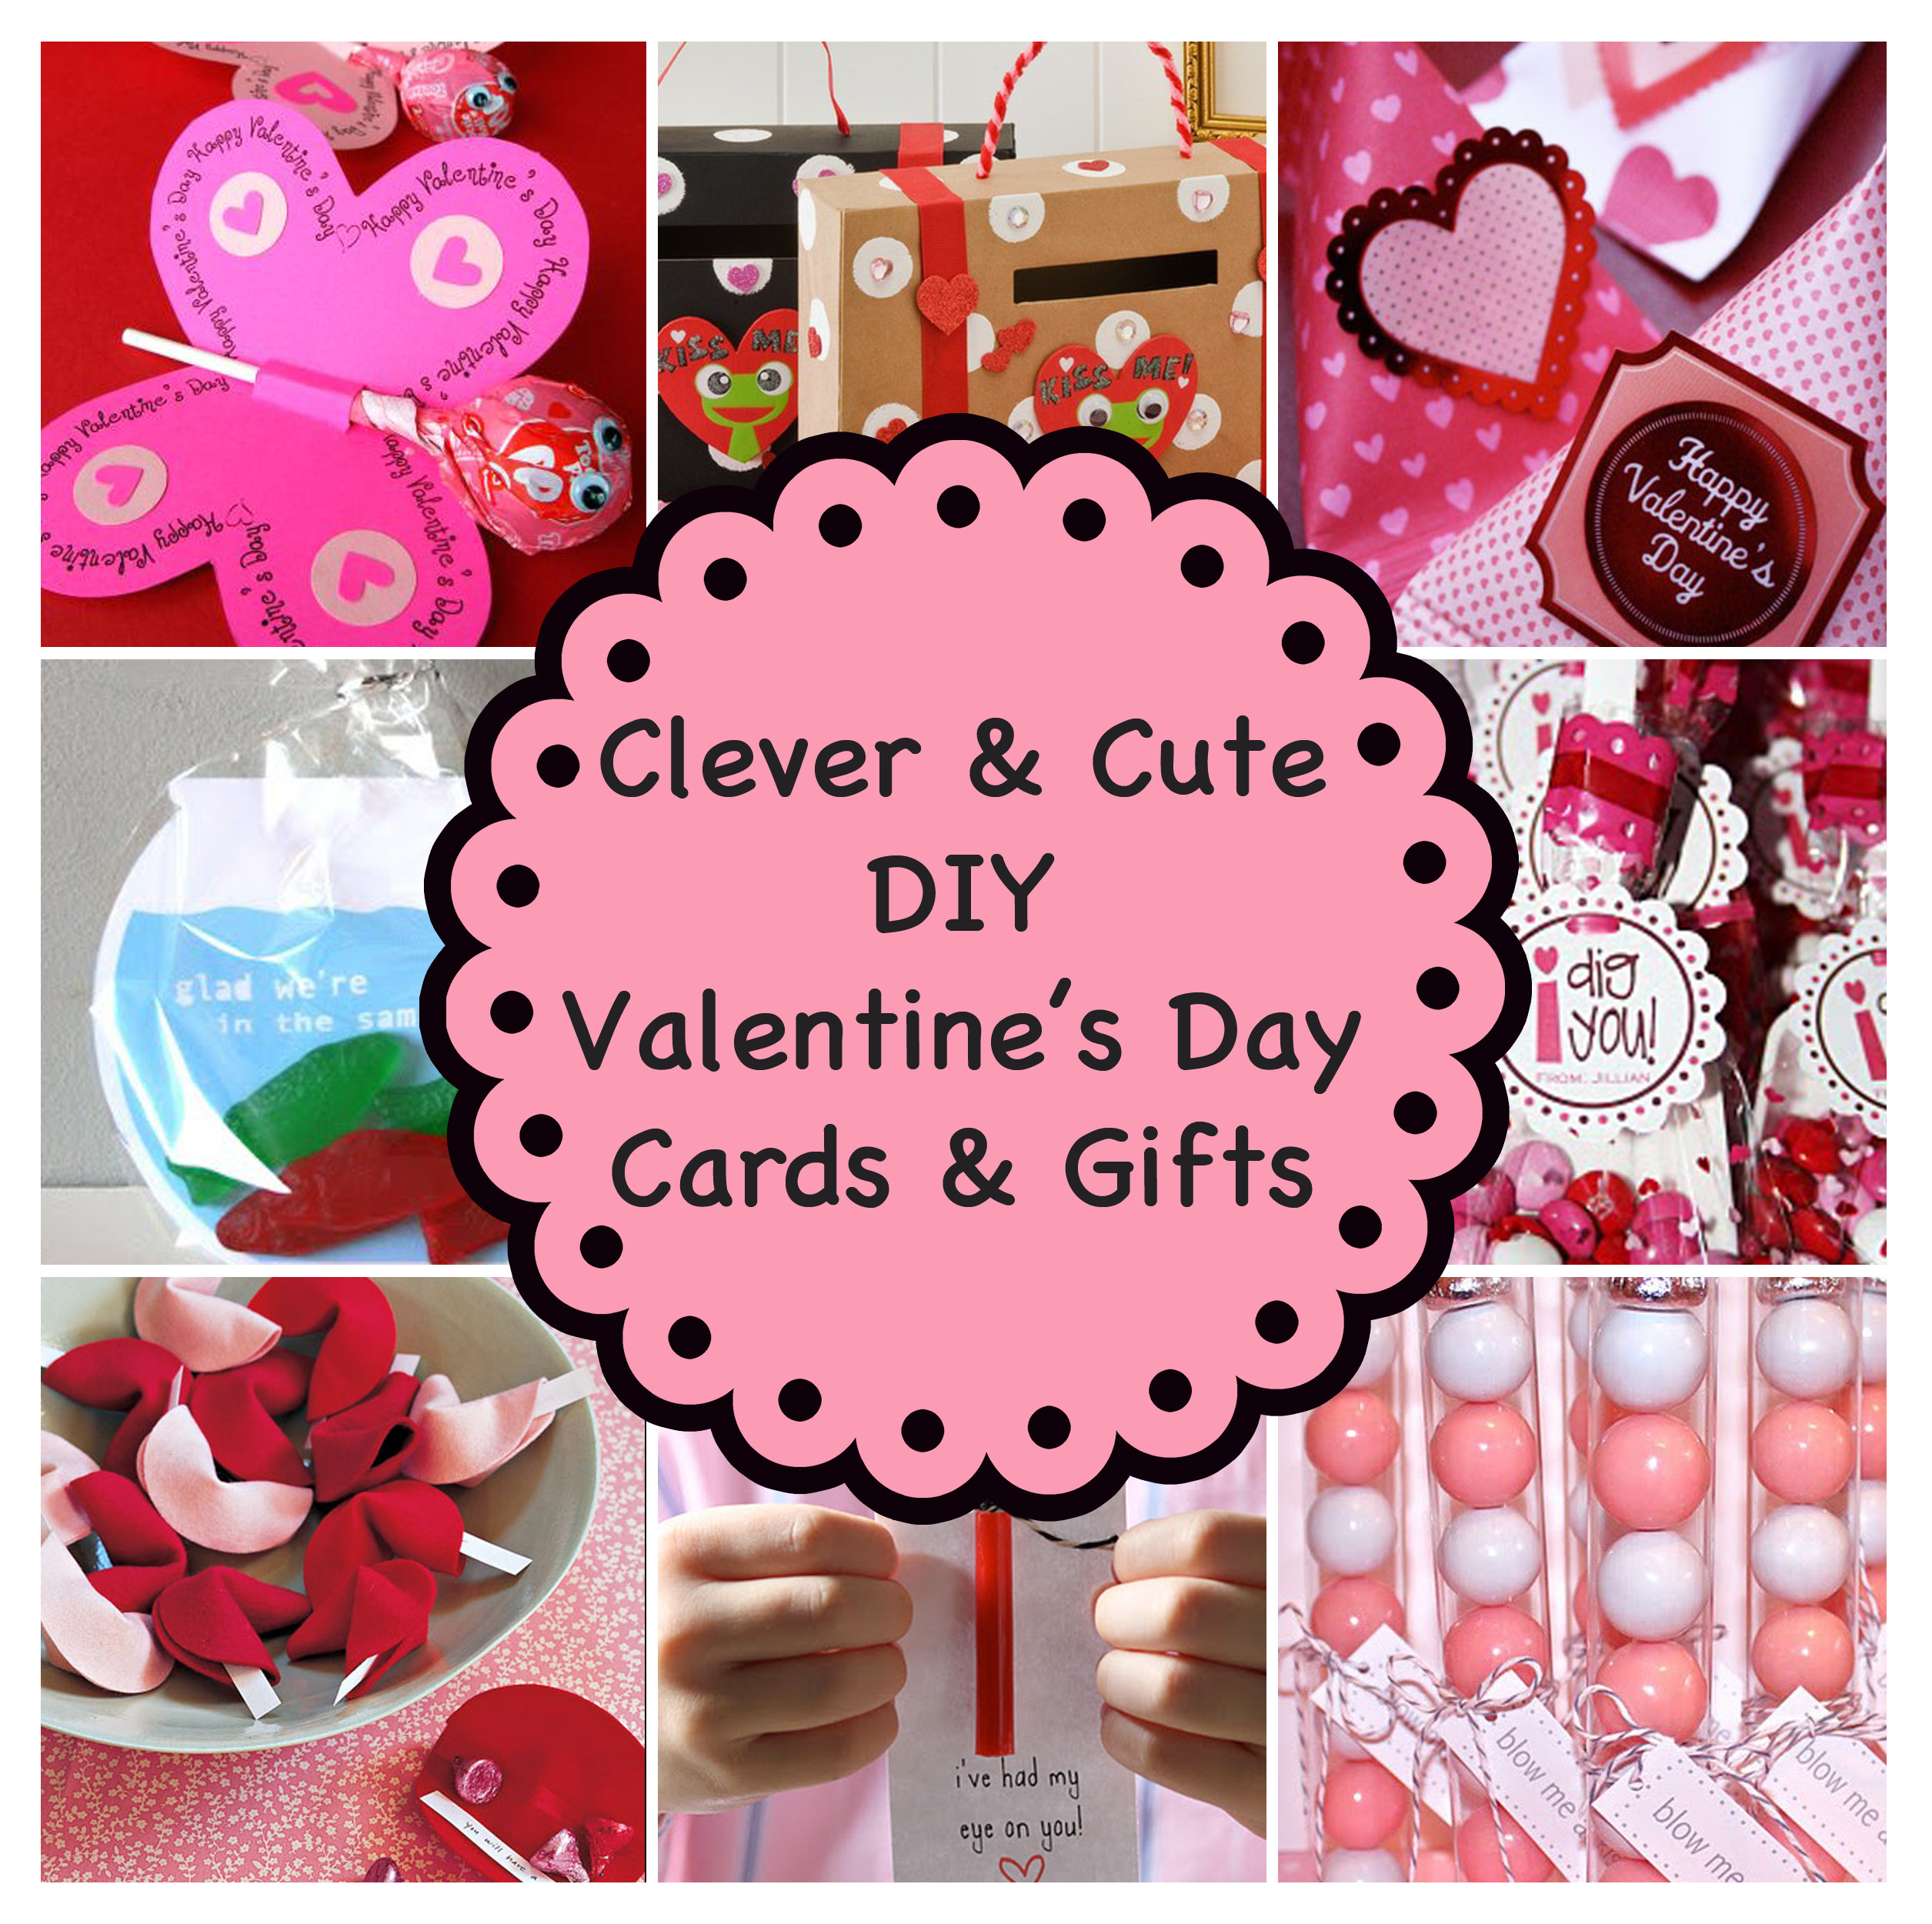 Cute Valentines Day Gifts
 Clever and Cute DIY Valentine’s Day Cards & Gifts